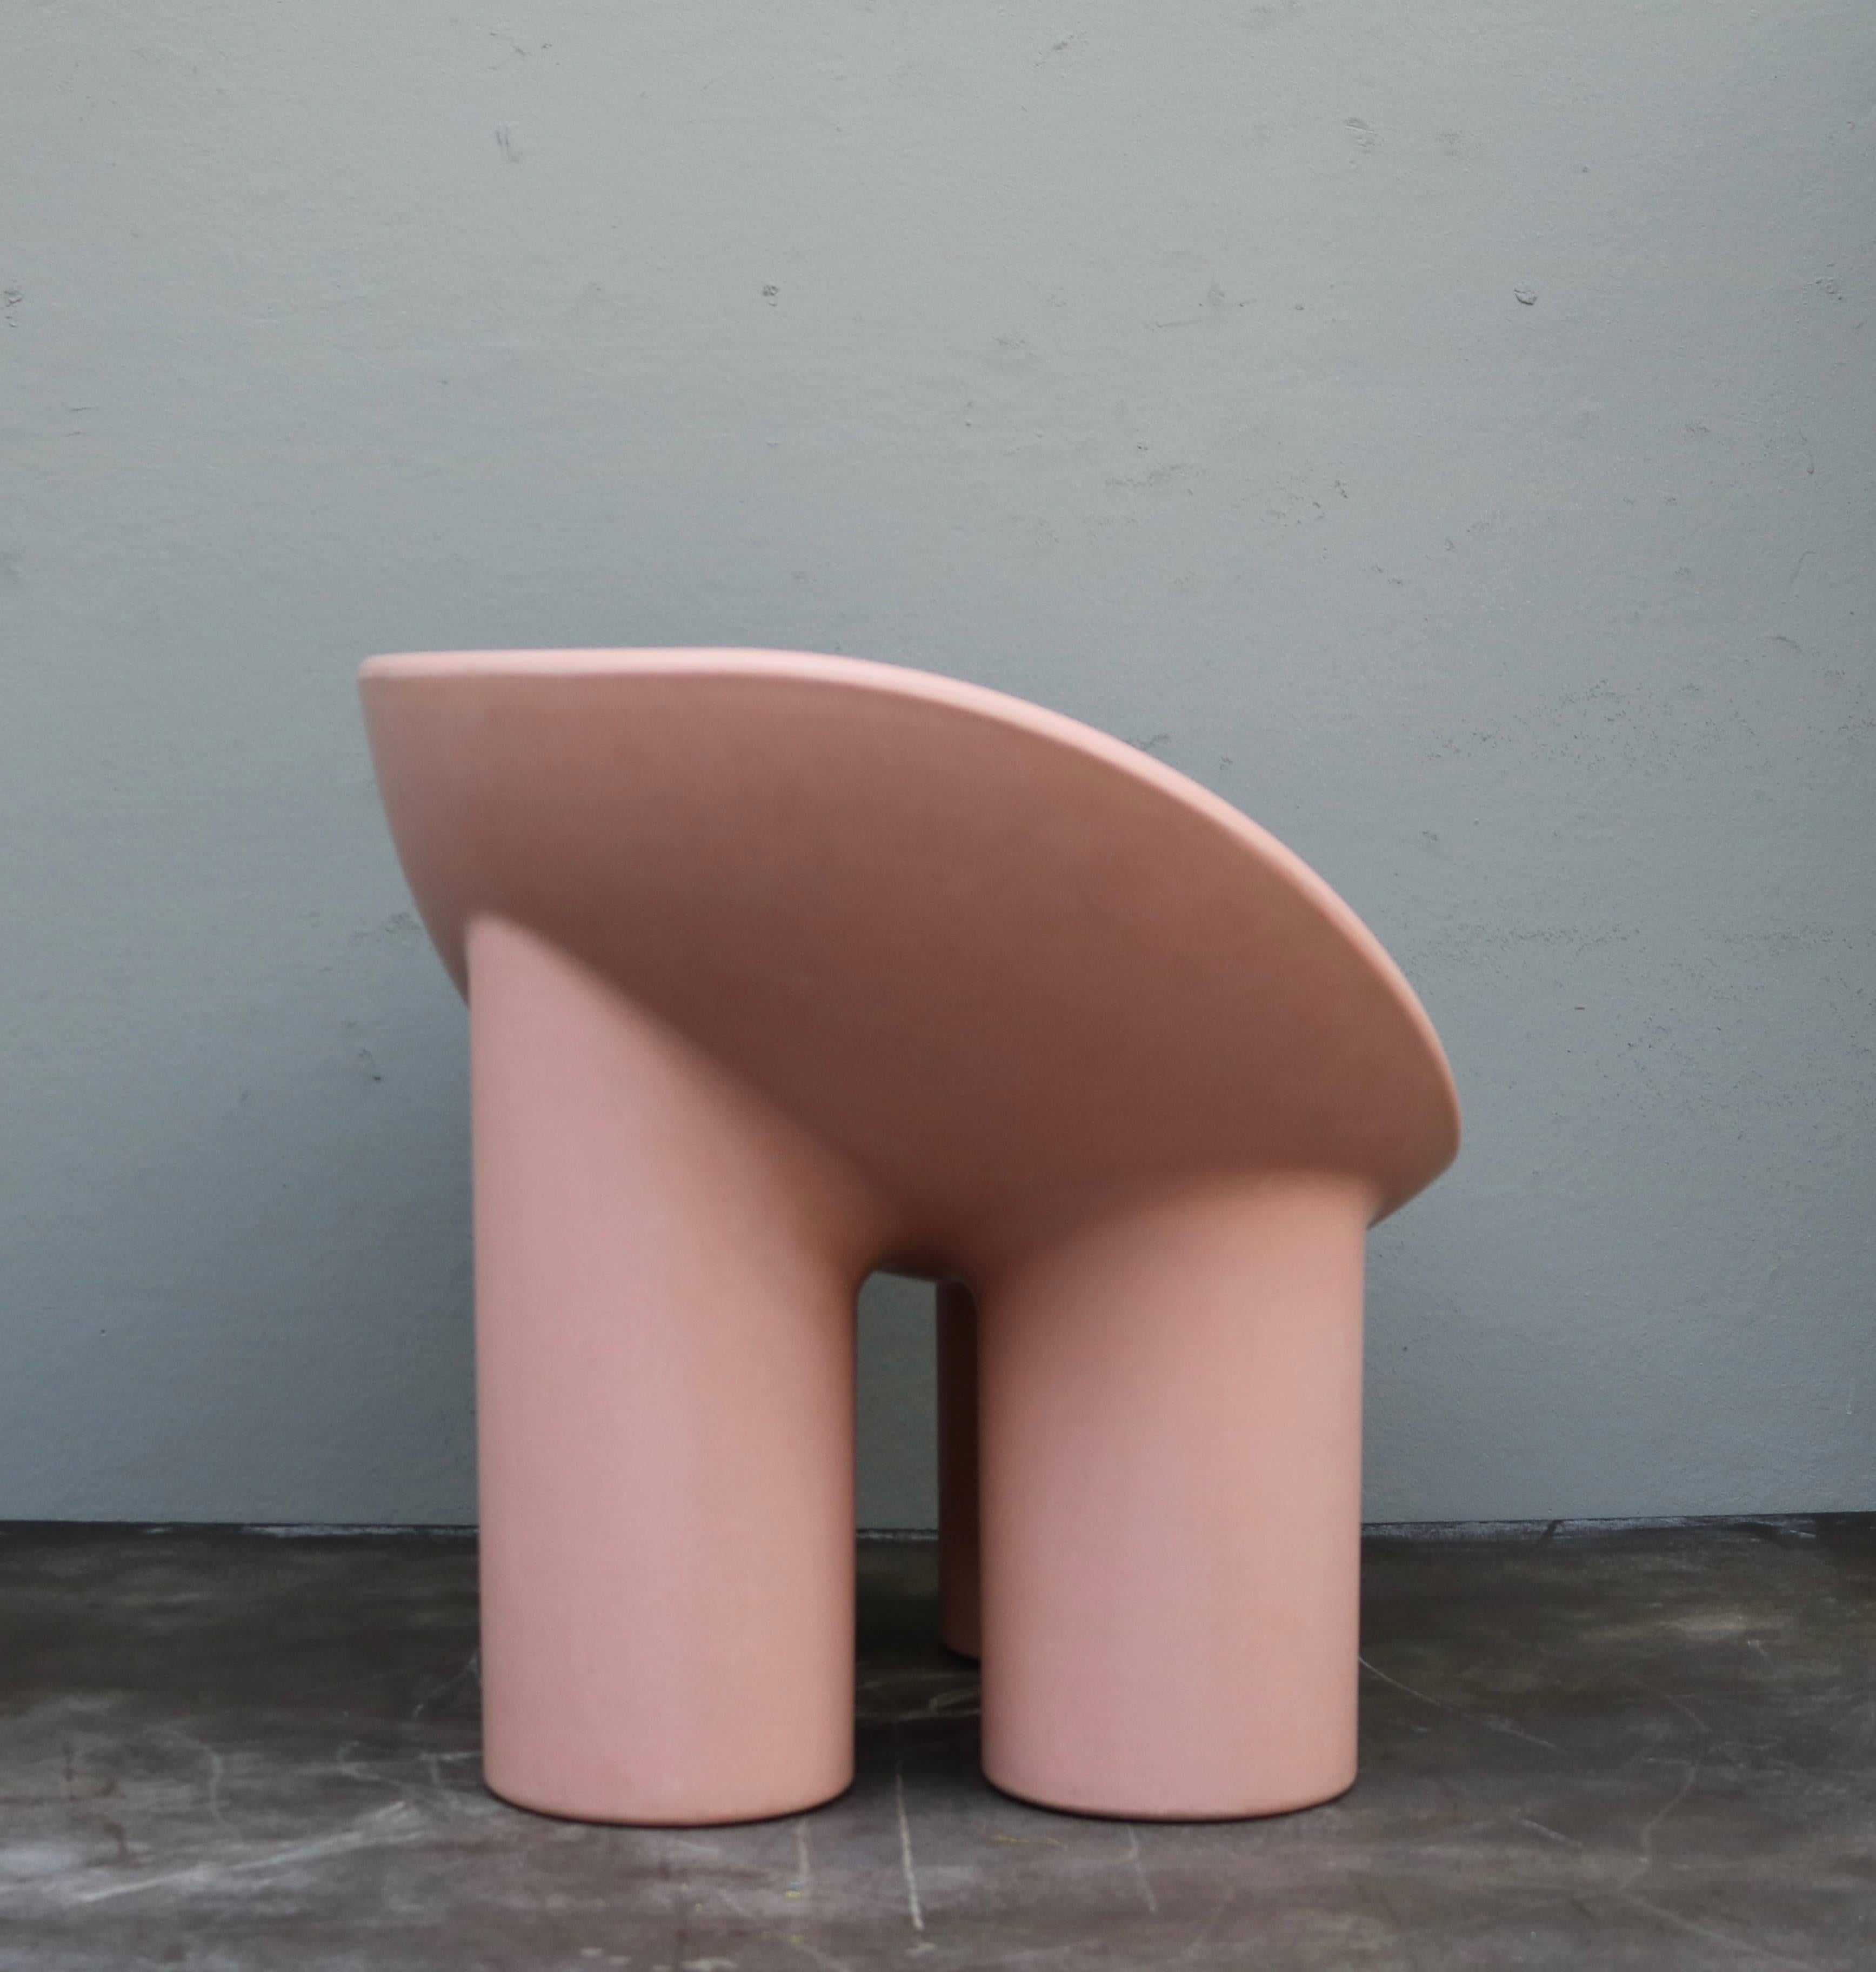 The Roly Roly chair by Faye Toogood has a dish-shaped seat crafted in raw fiberglass for strength and durability.